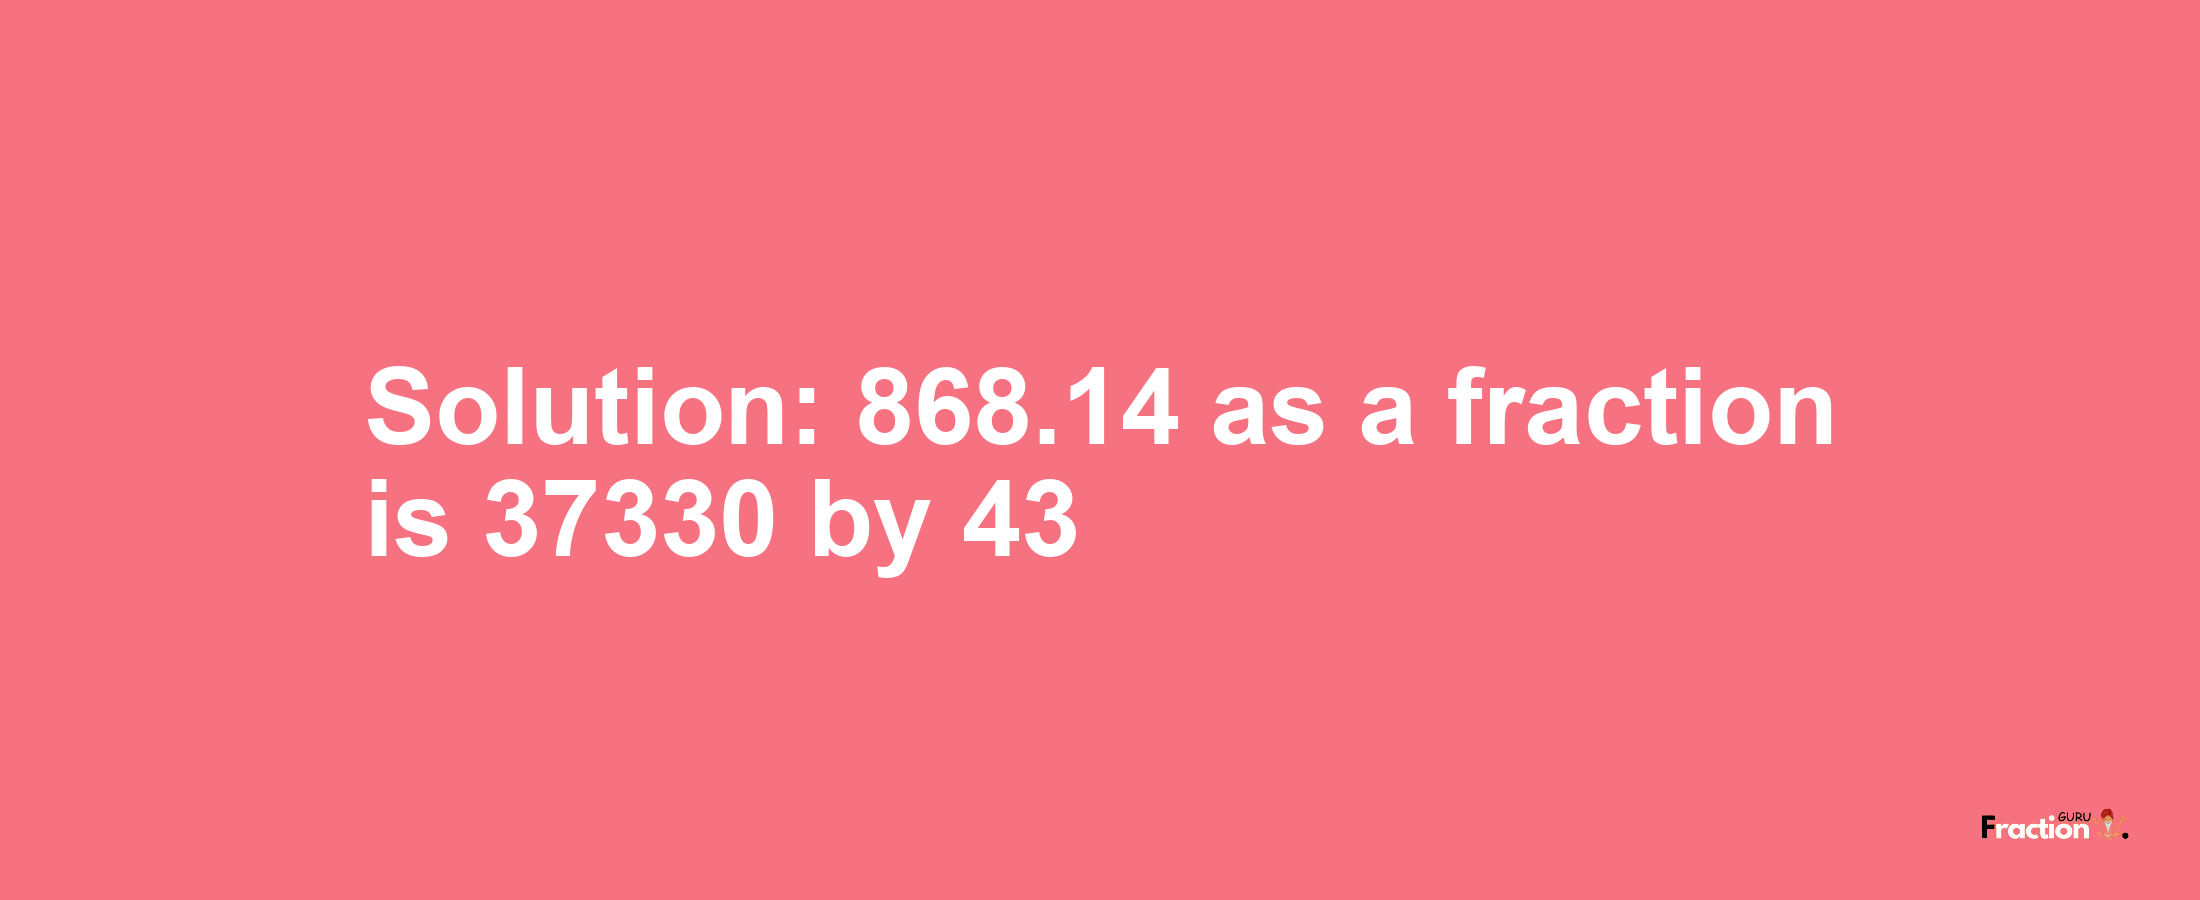 Solution:868.14 as a fraction is 37330/43